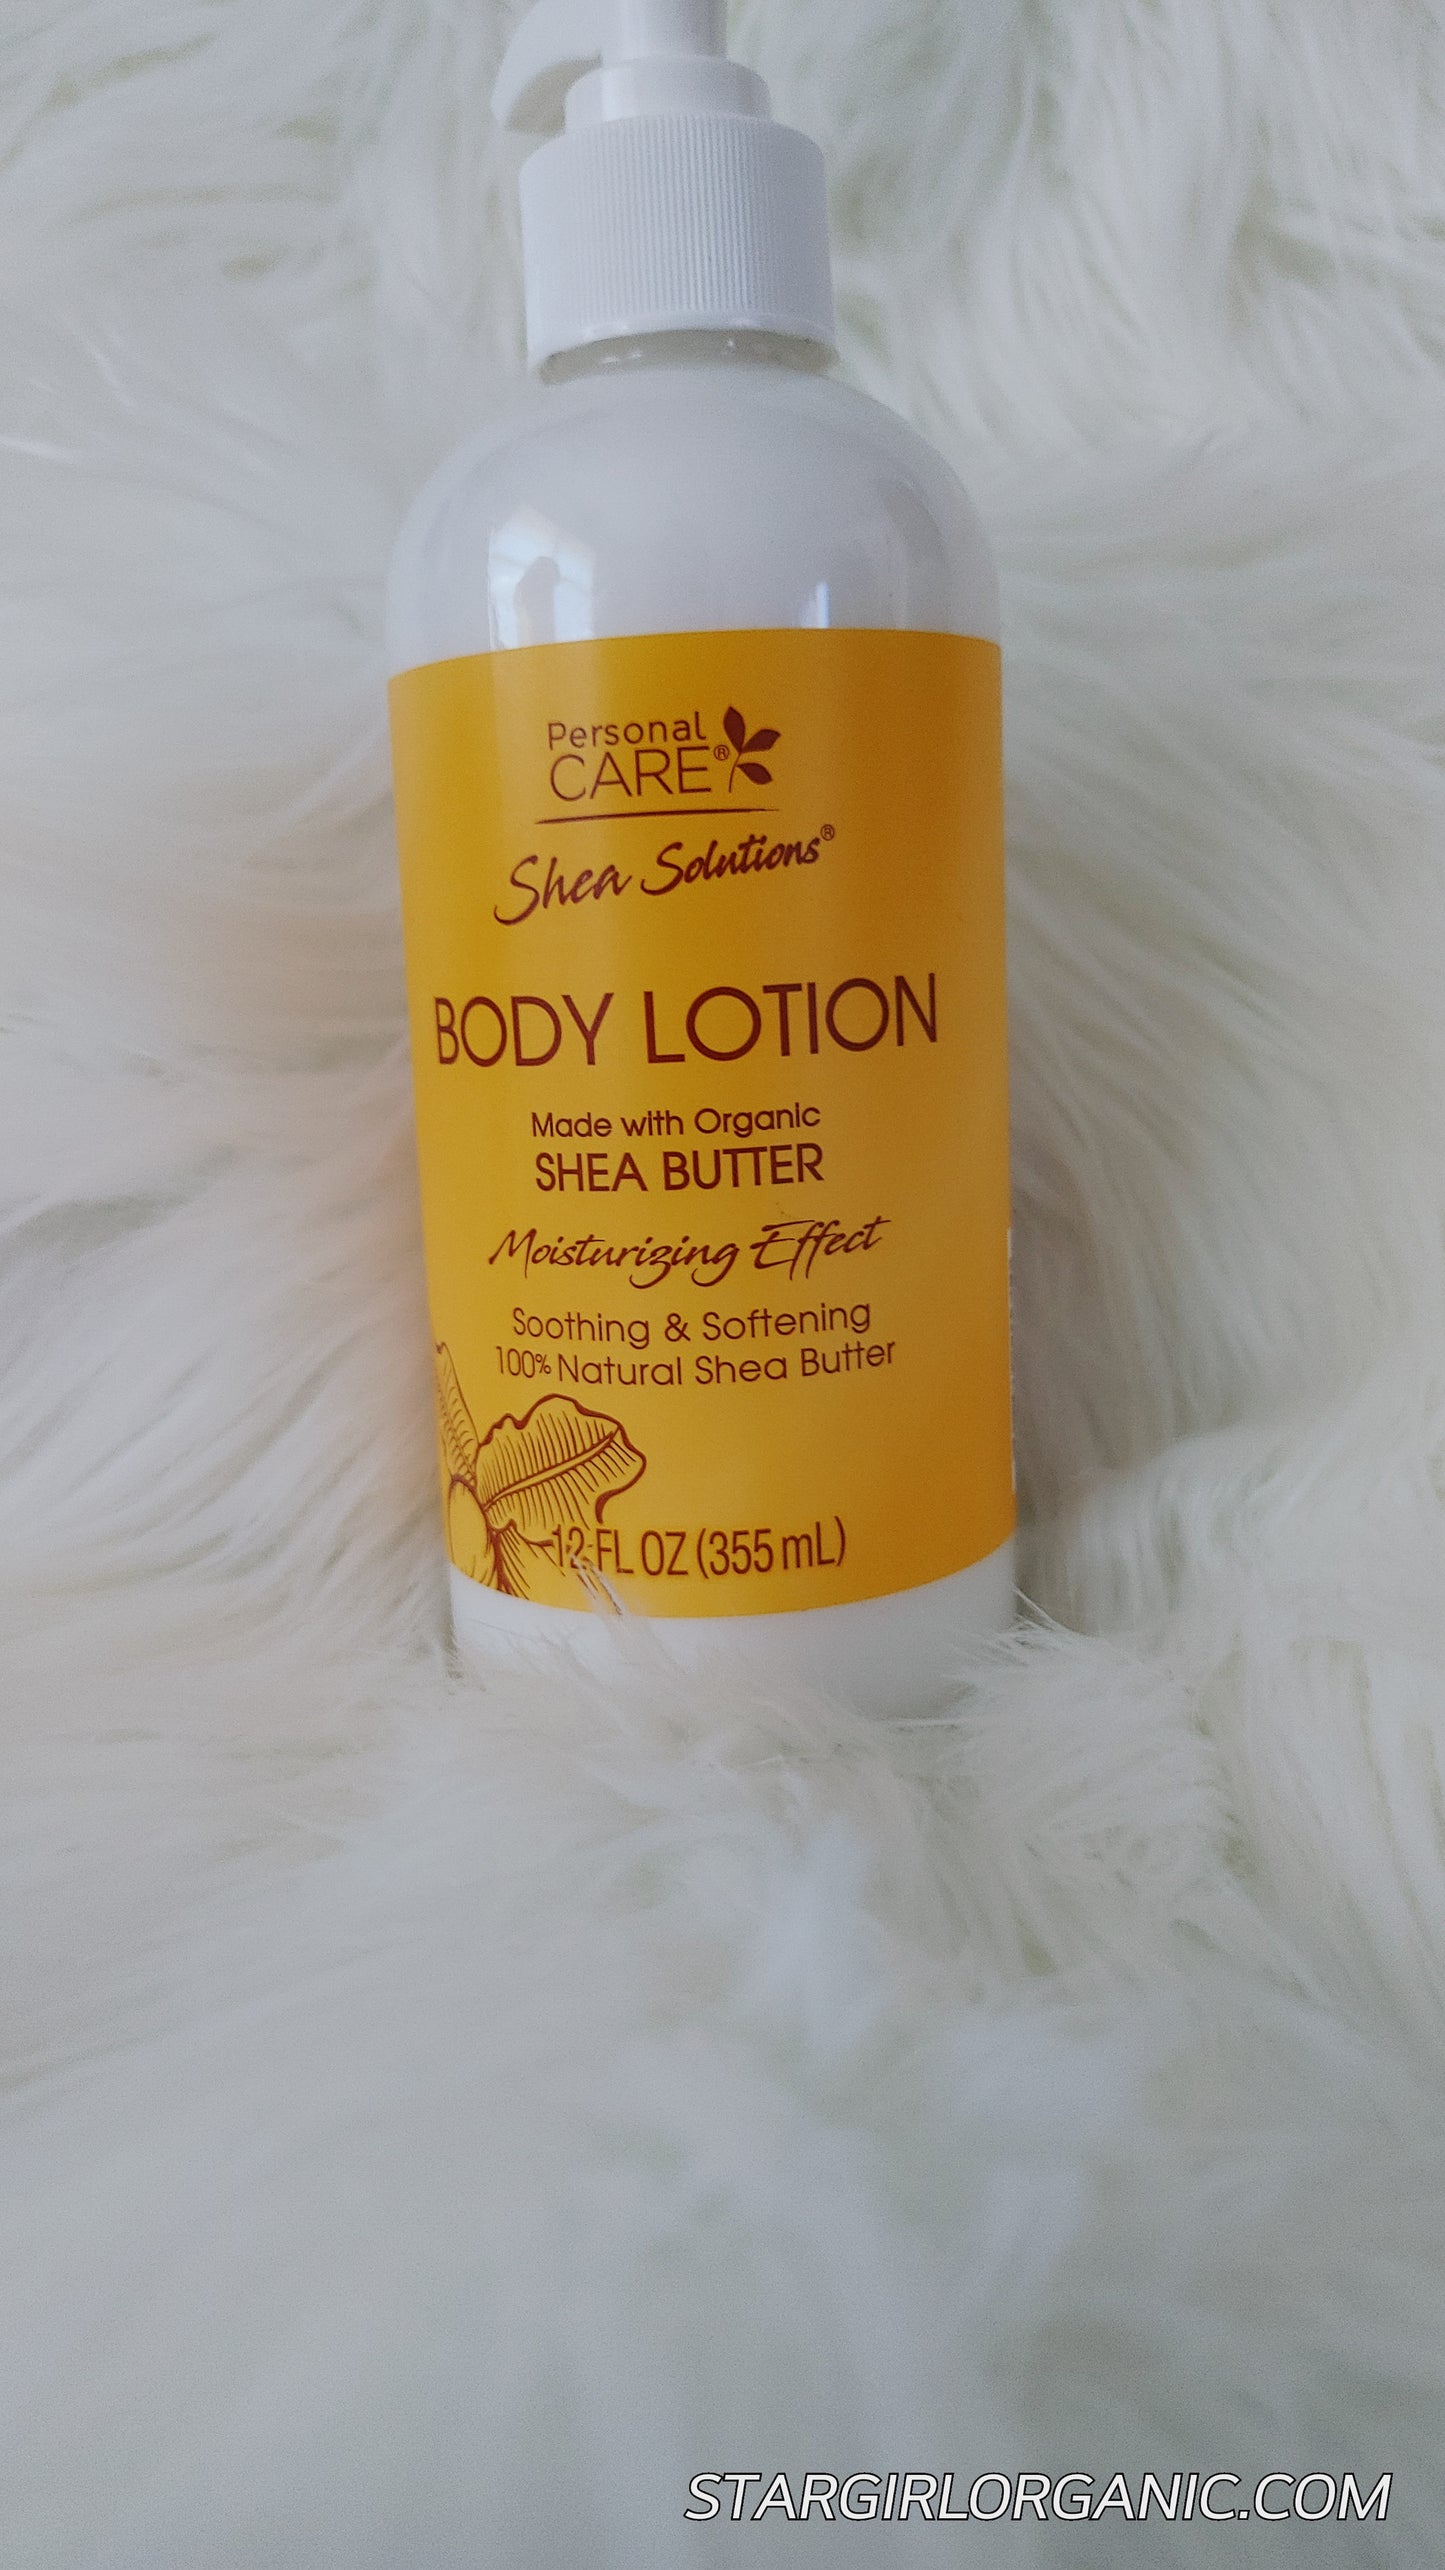 Personal Care Shea Solutions Body Lotion.